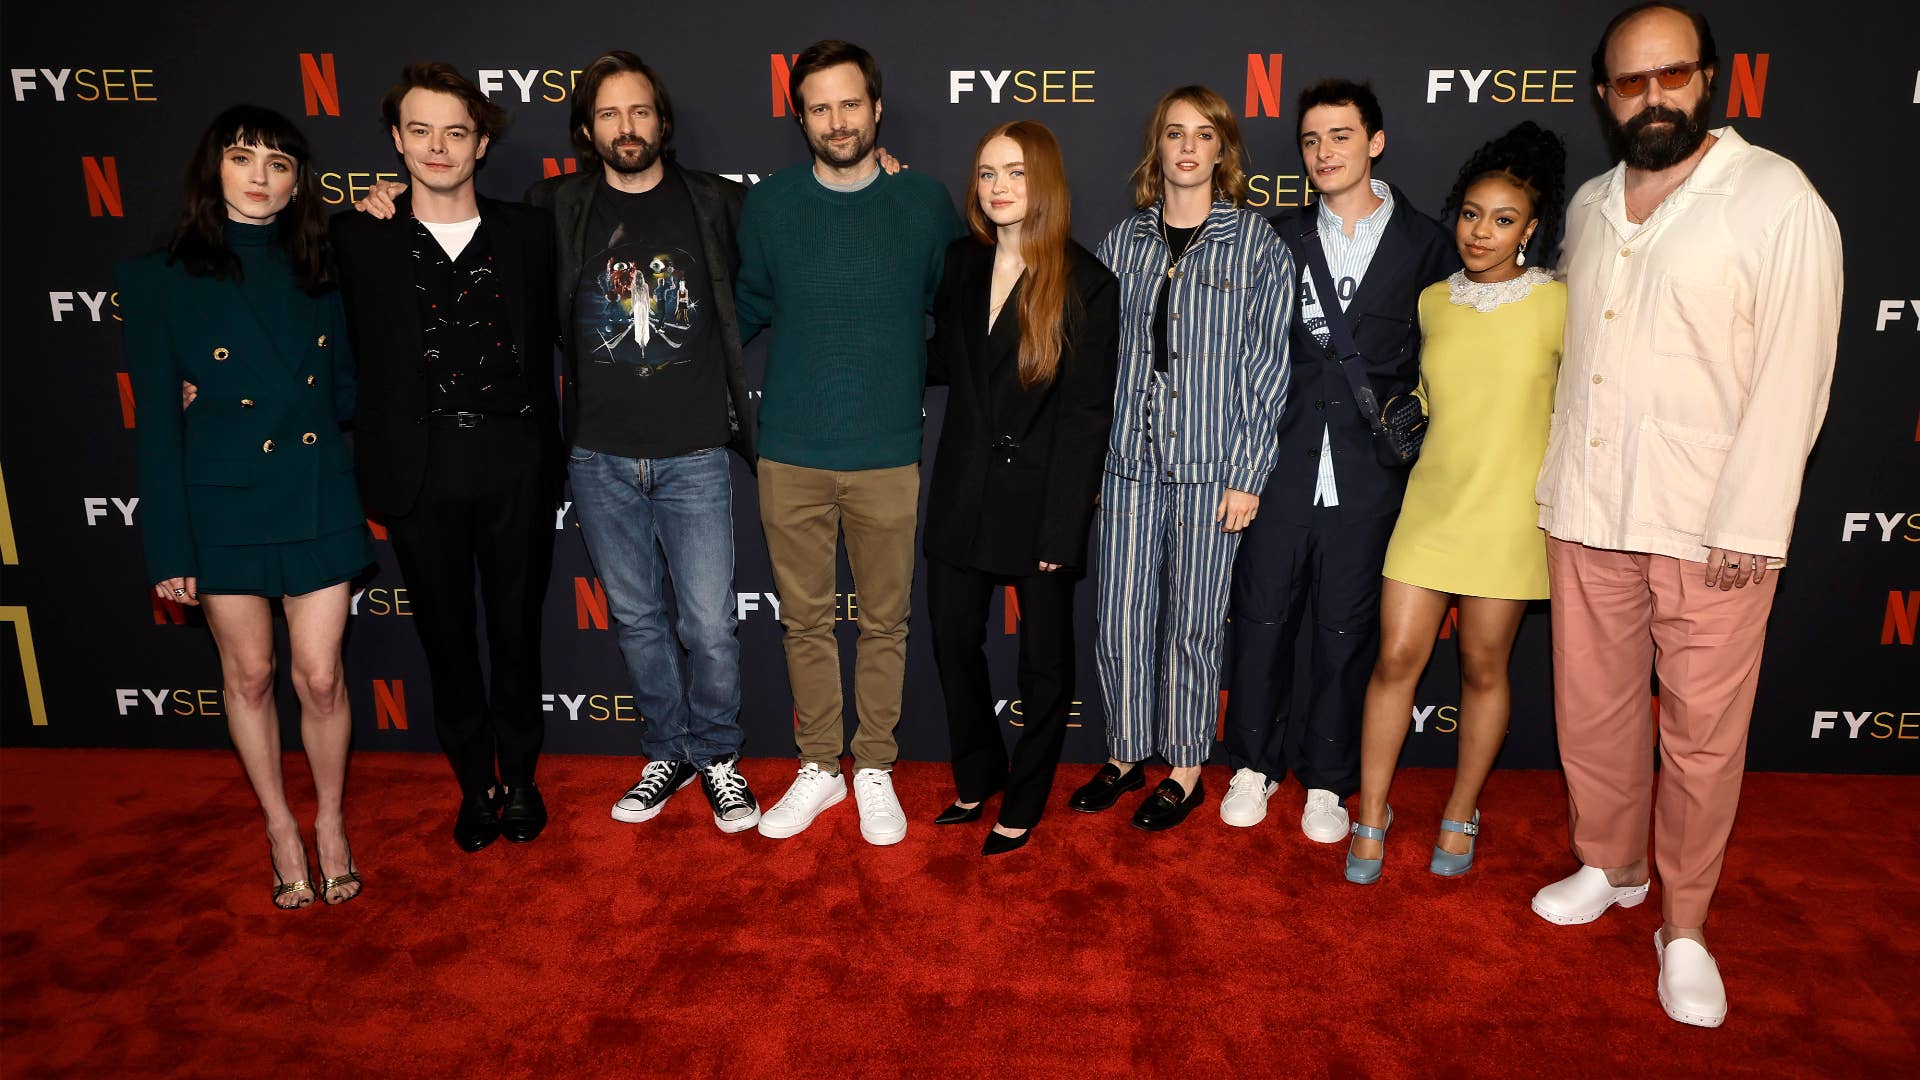 Cast members of Stranger Things are pictured